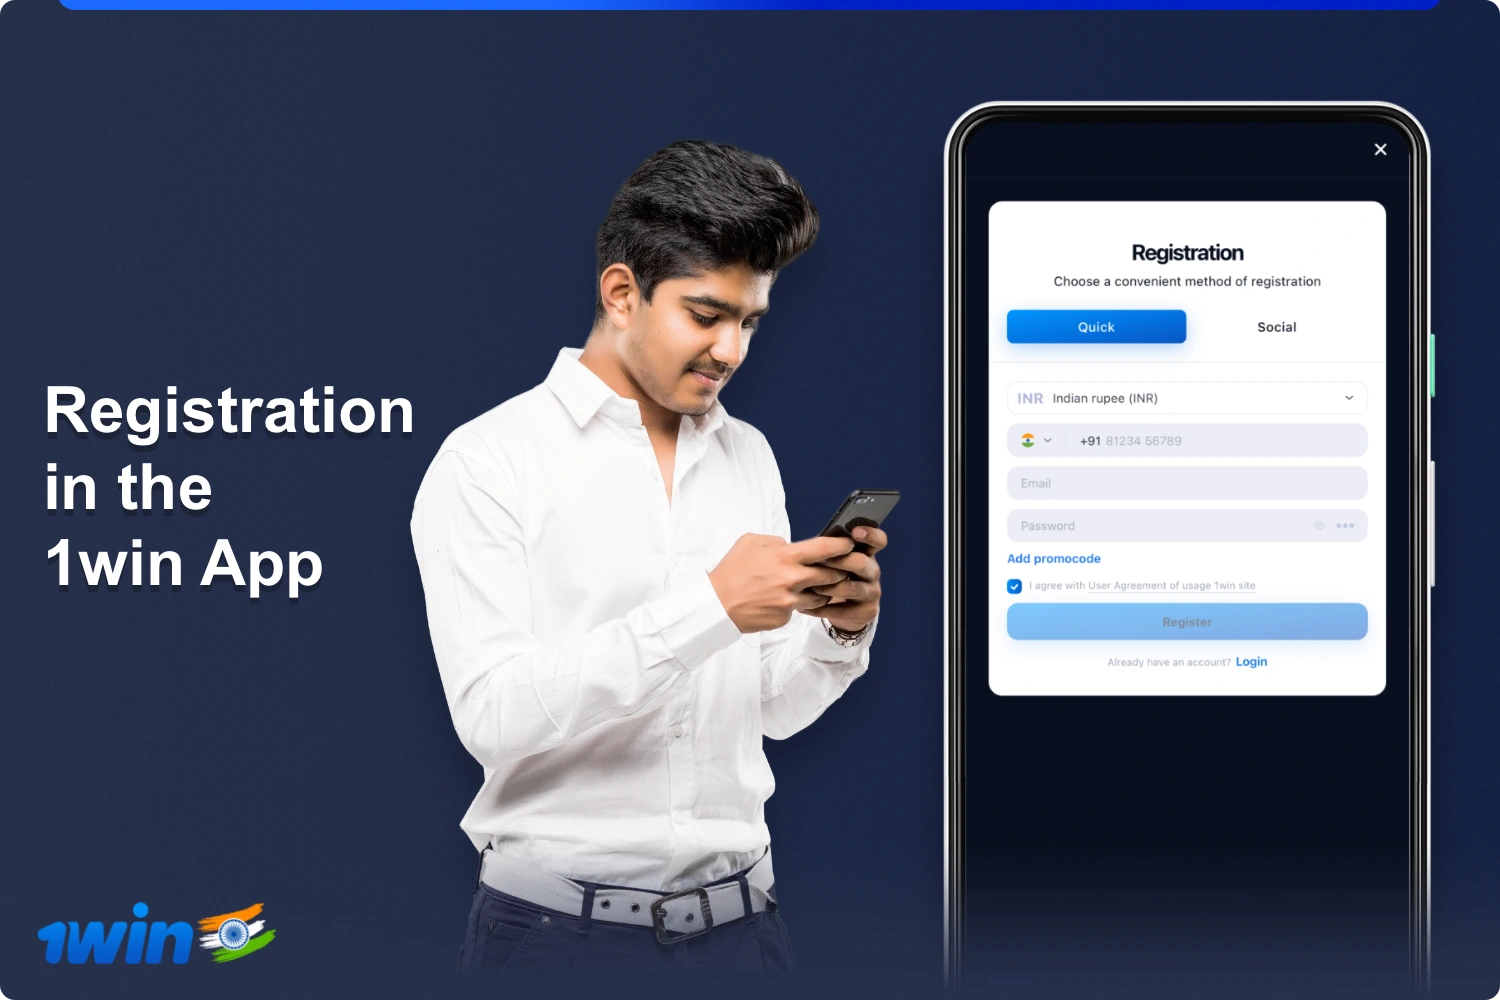 Registration in the mobile application 1win is carried out in several steps